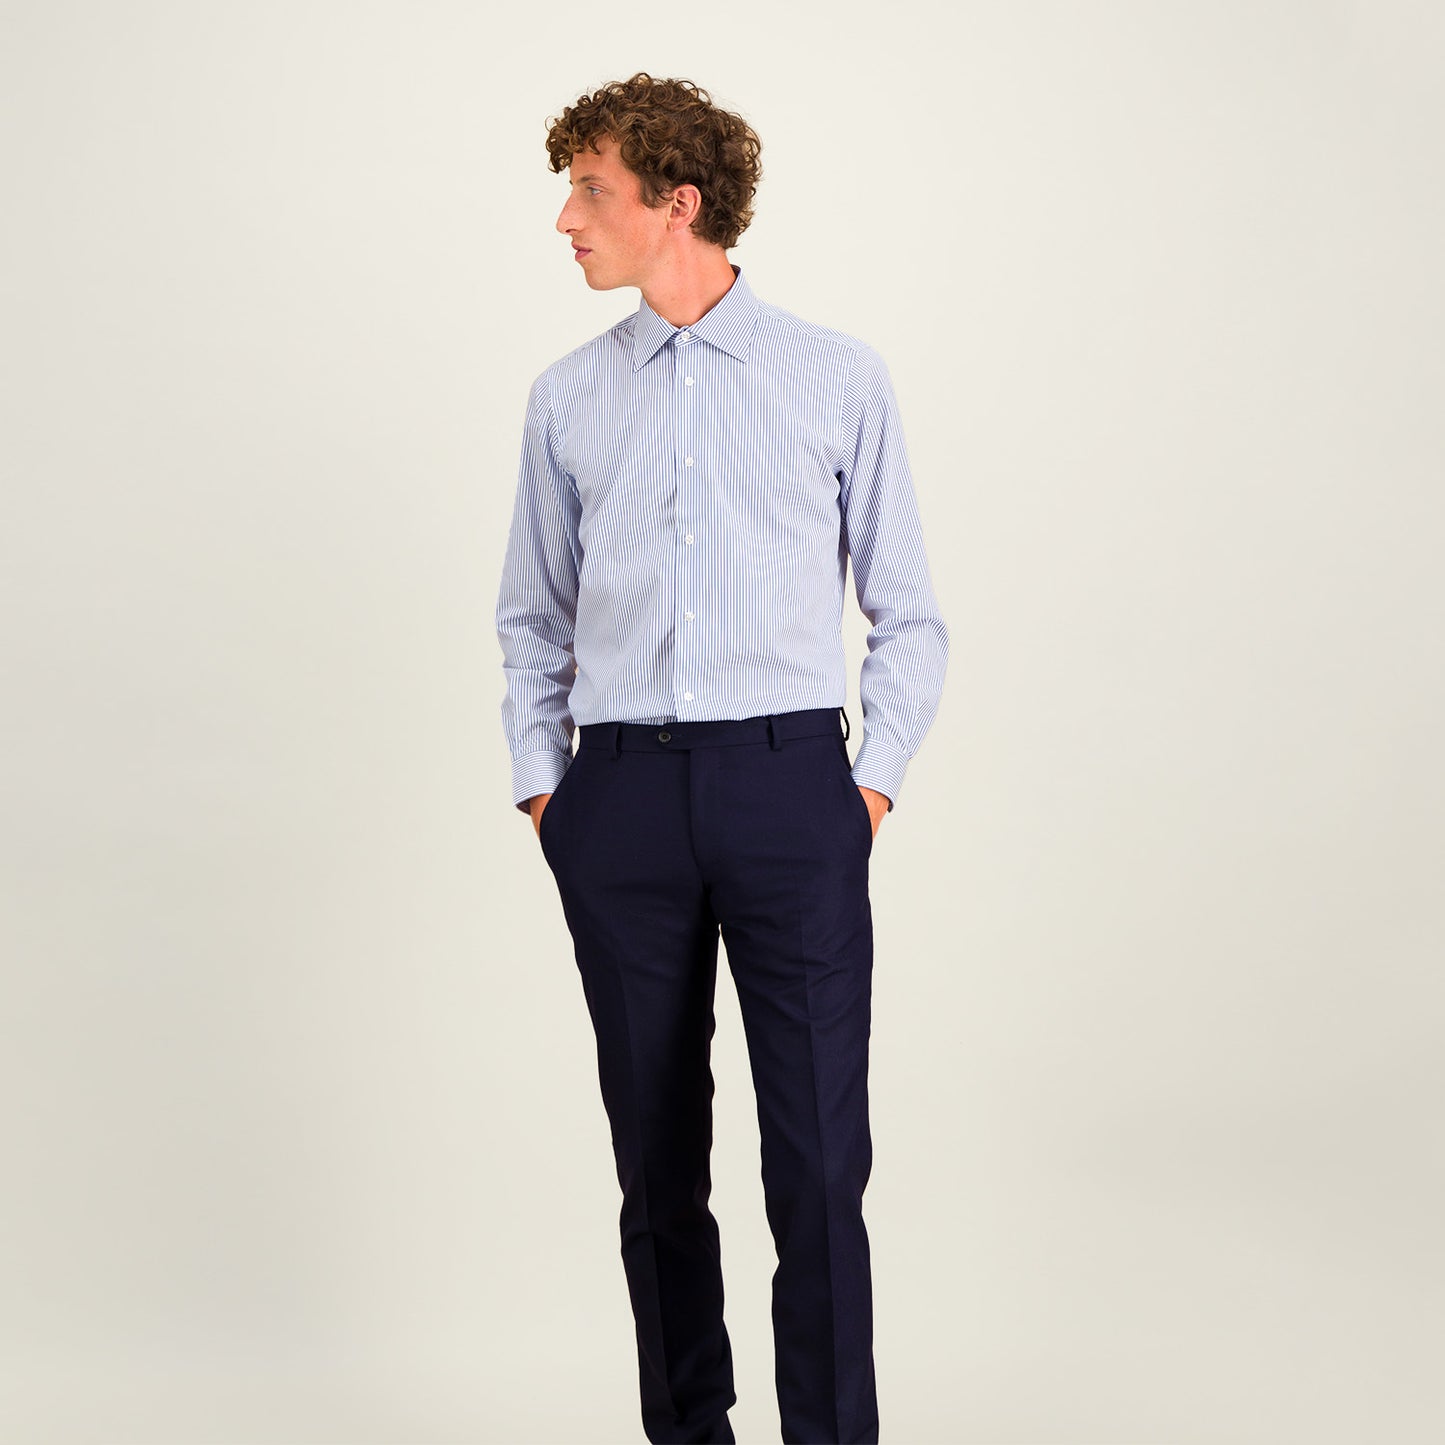 Fitted twill shirt with fine blue and white stripes